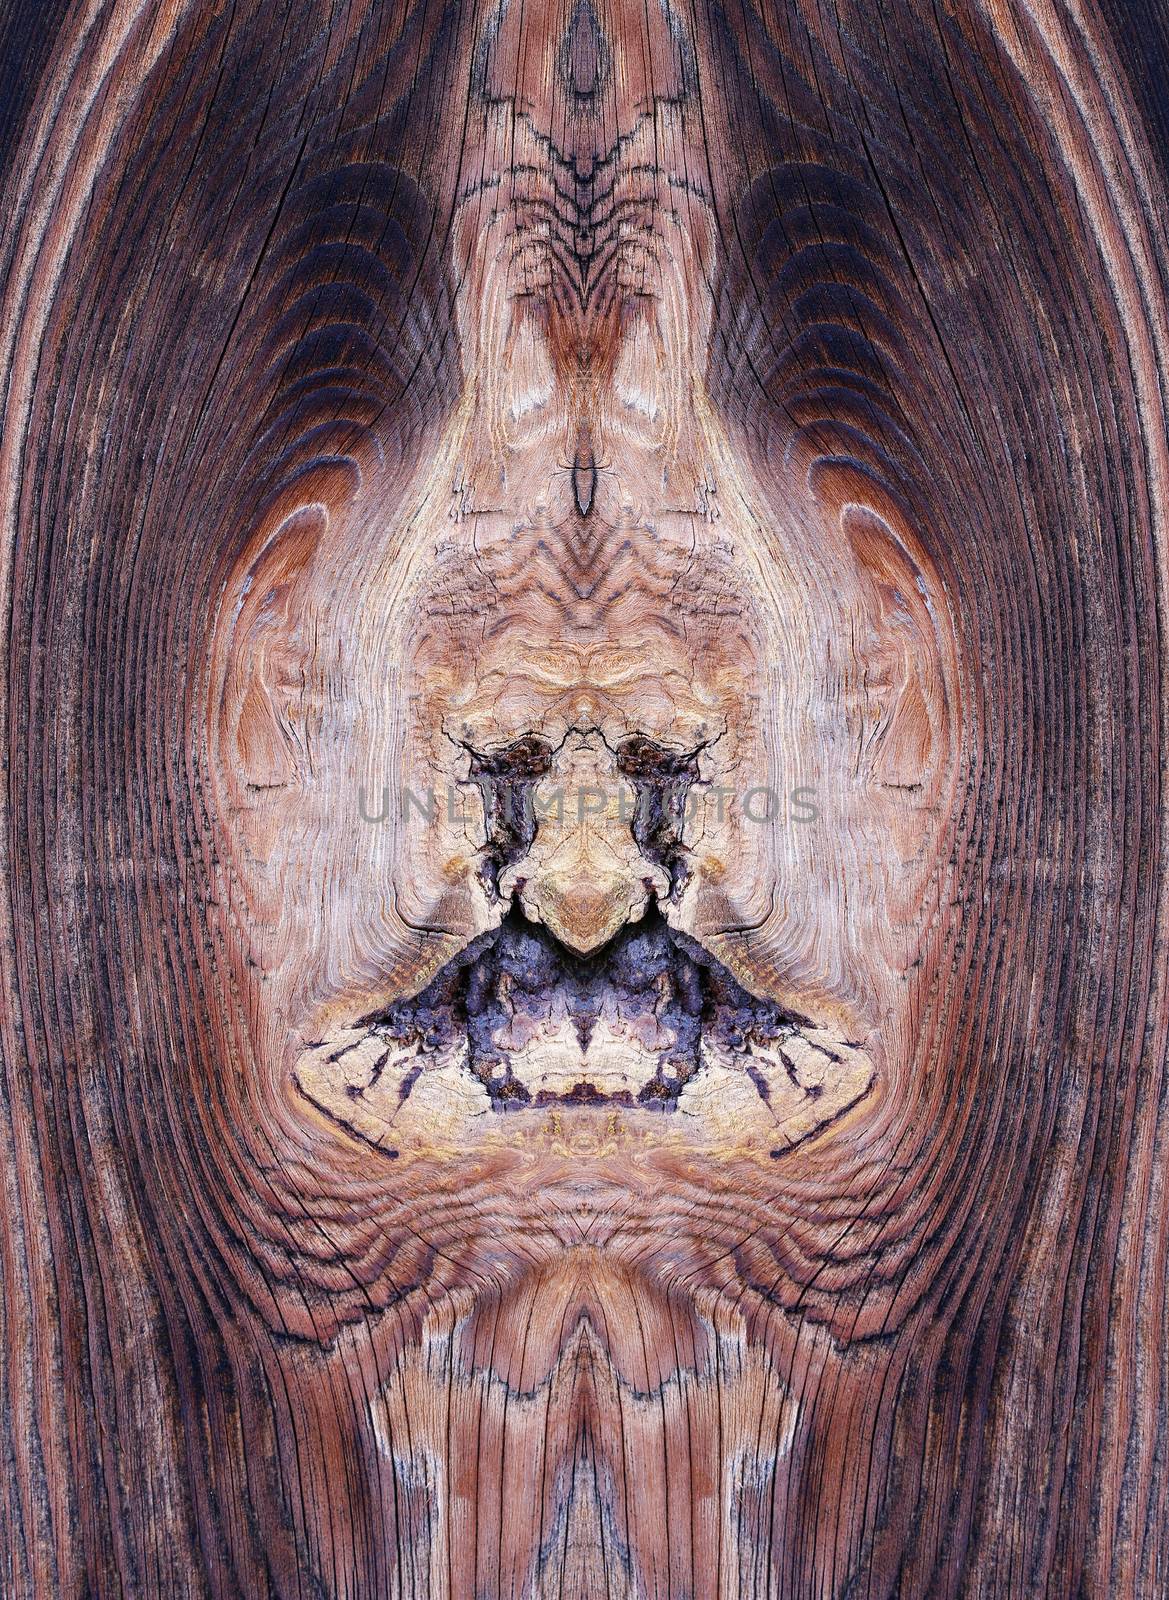 Bizarre knot in wood - wooden texture by Mibuch